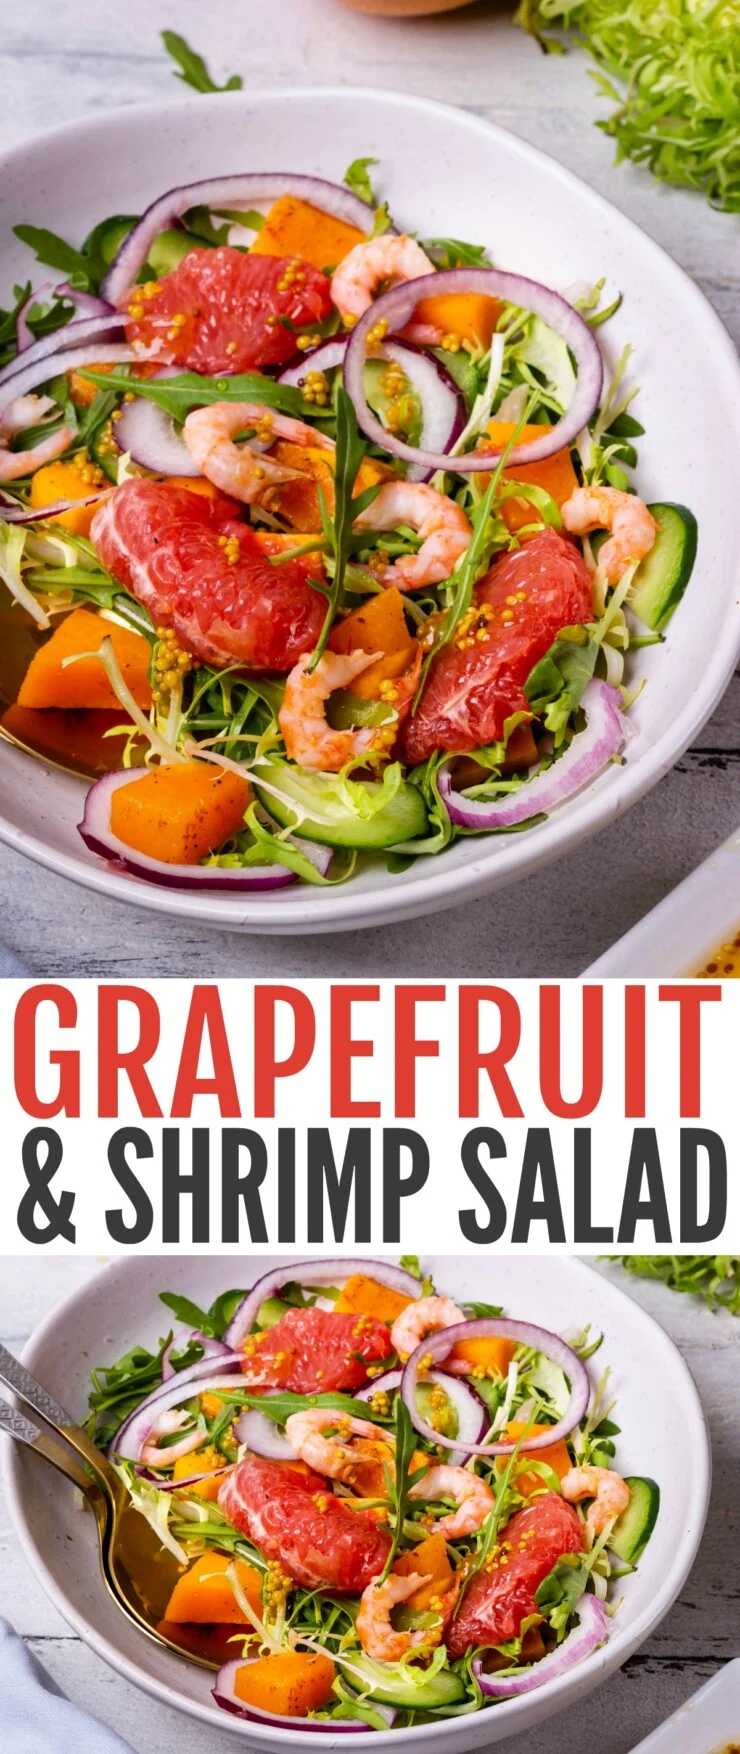 This Grapefruit & Shrimp Salad is just the perfect size for lunch for one but can easily be made for a crowd, simply multiply the ingredients for a delicious salad all will enjoy.